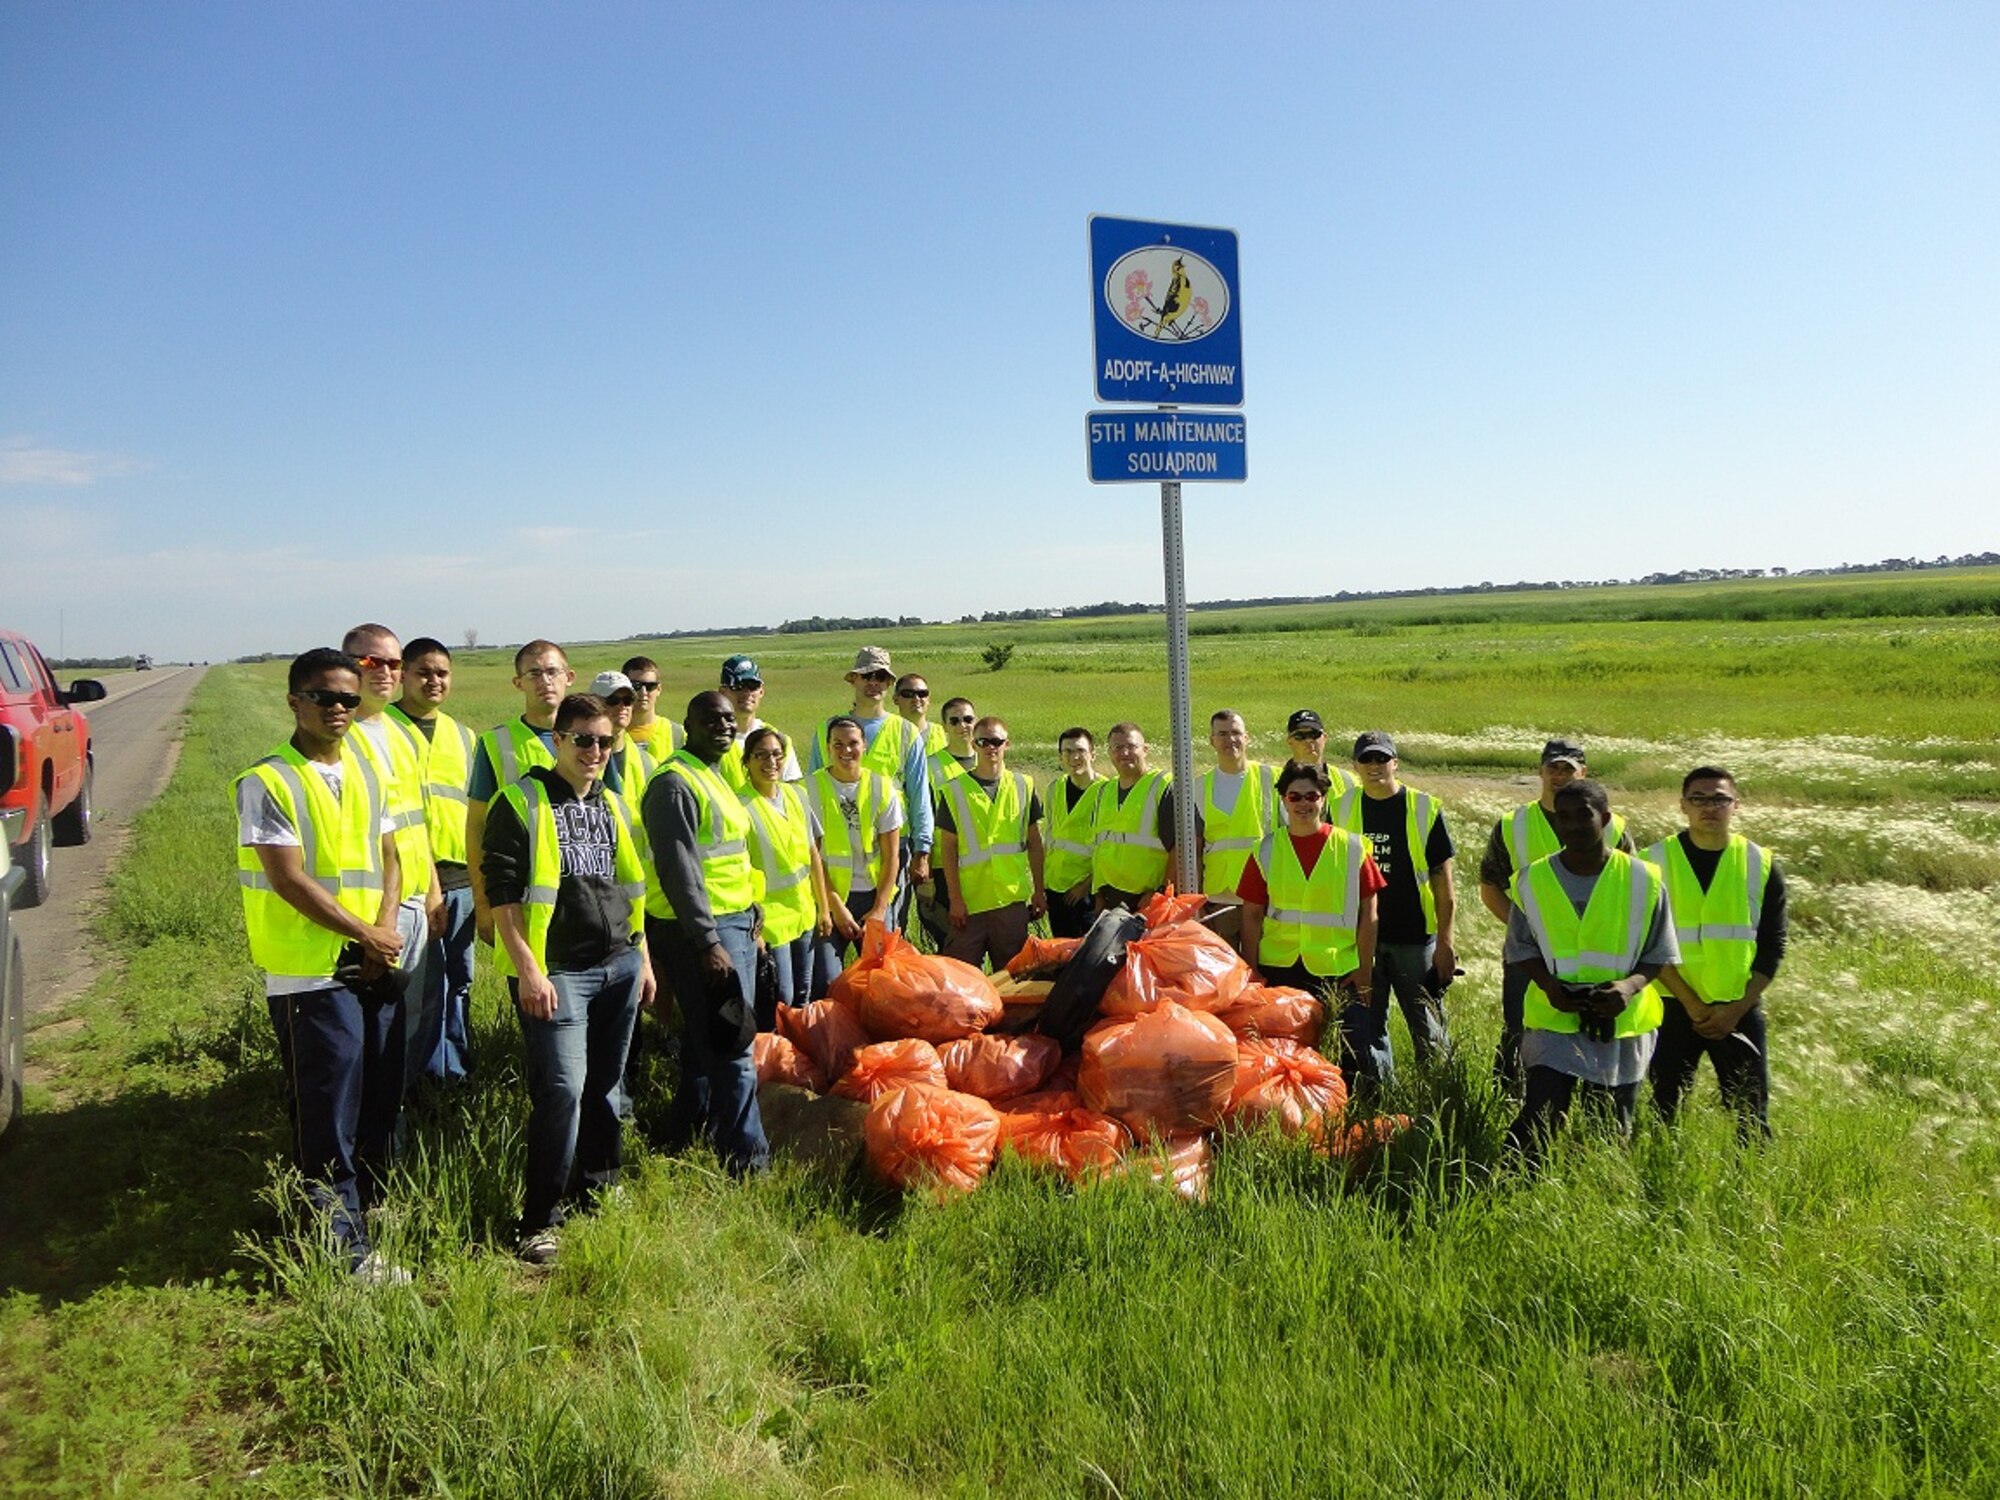 Members of the 5th Maintenance Squadron cleaned up trash, wood and vehicle debris along Highway 83 between mile markers 206 and 208, July 13, 2013. More than 20 personnel volunteered their time and energy to enhance the area as part of the Adopt-a-Highway program. The efforts made by the 5th MXS volunteers continue to build pride and solidify the bond between the base and local community. (Courtesy photo)